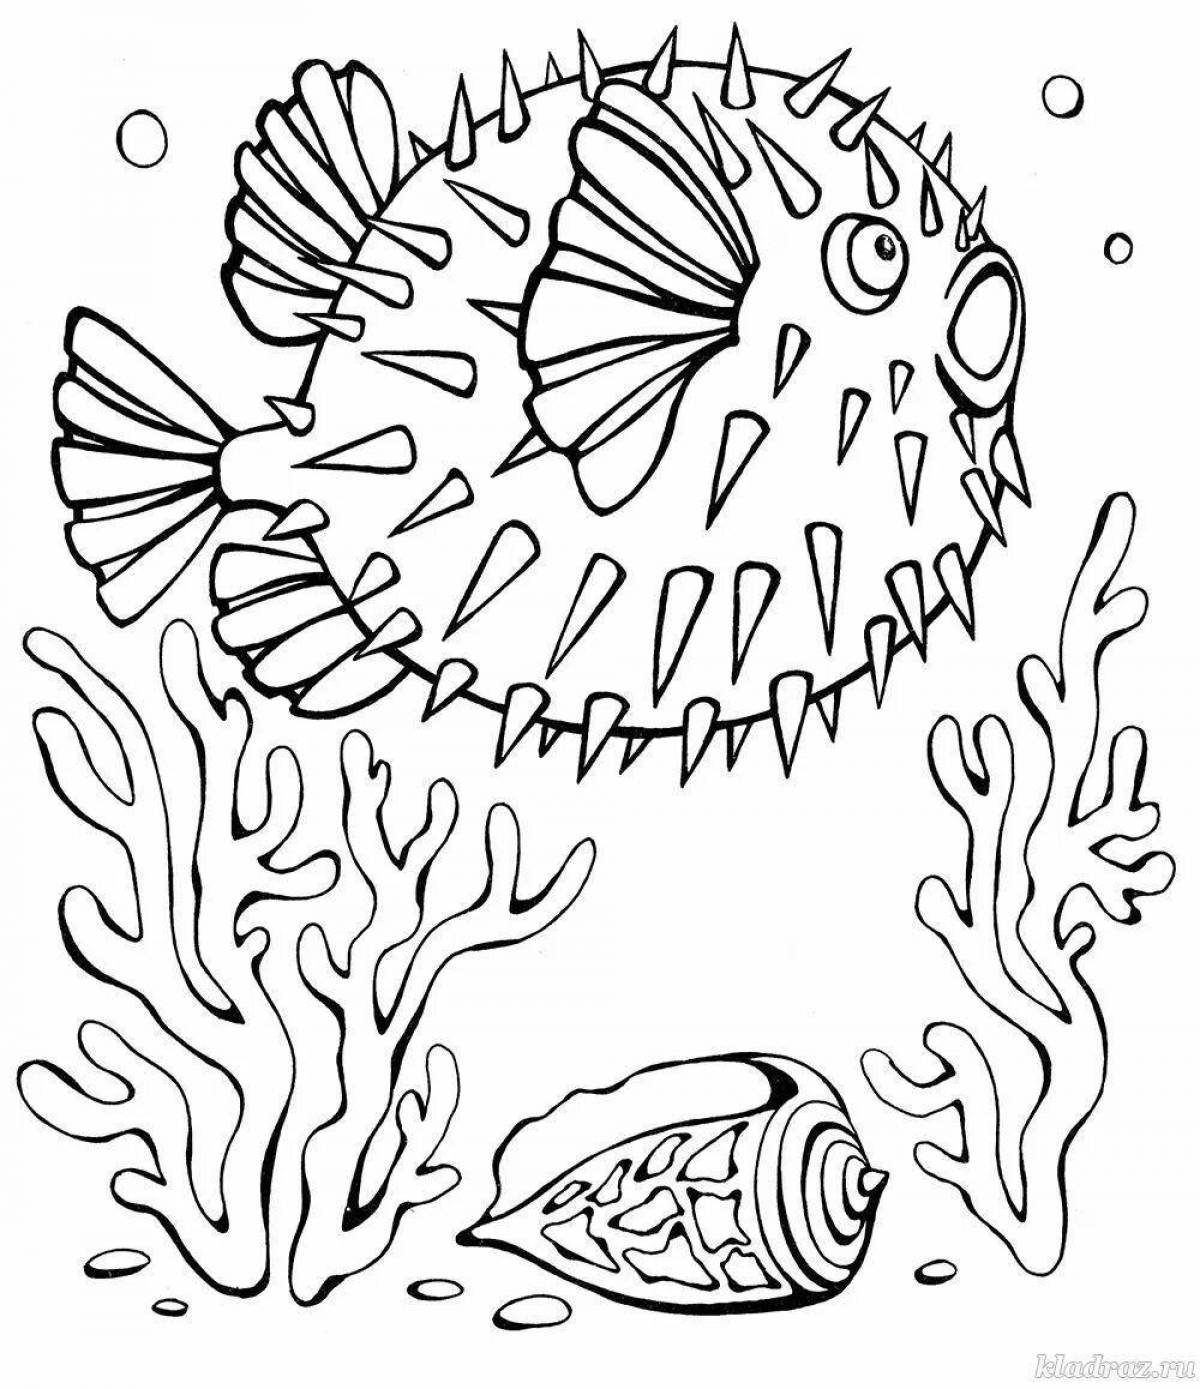 Live marine life coloring book for 6-7 year olds